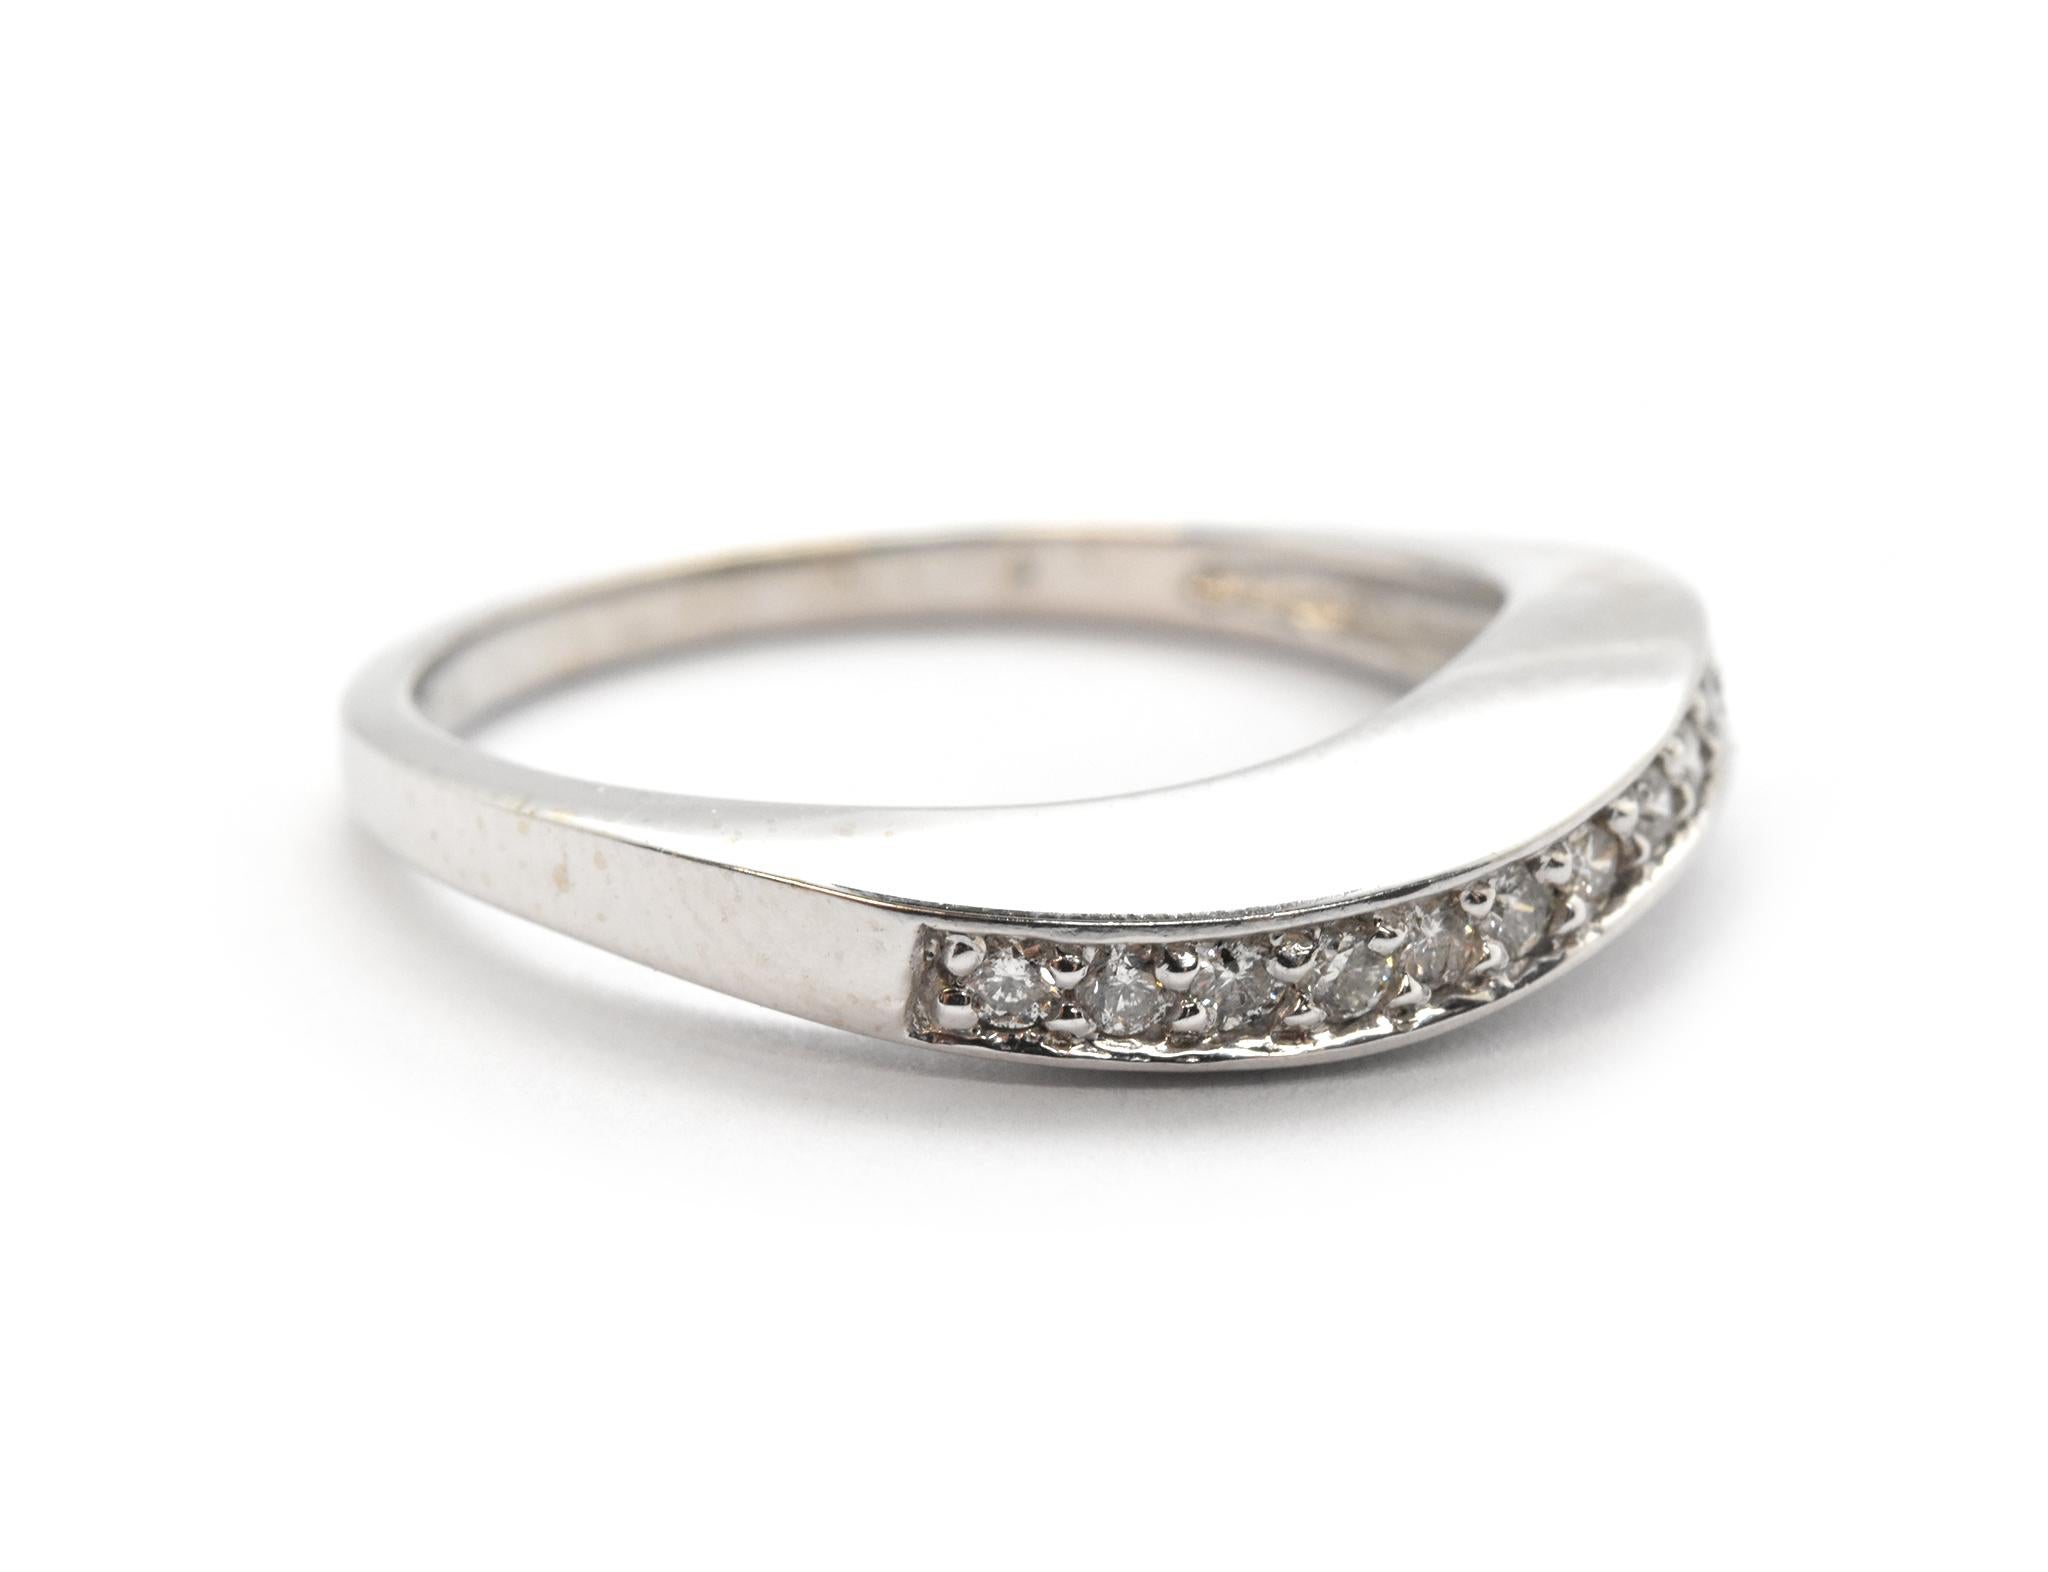 This ring is made in 14k white gold. It features round diamond set into a 